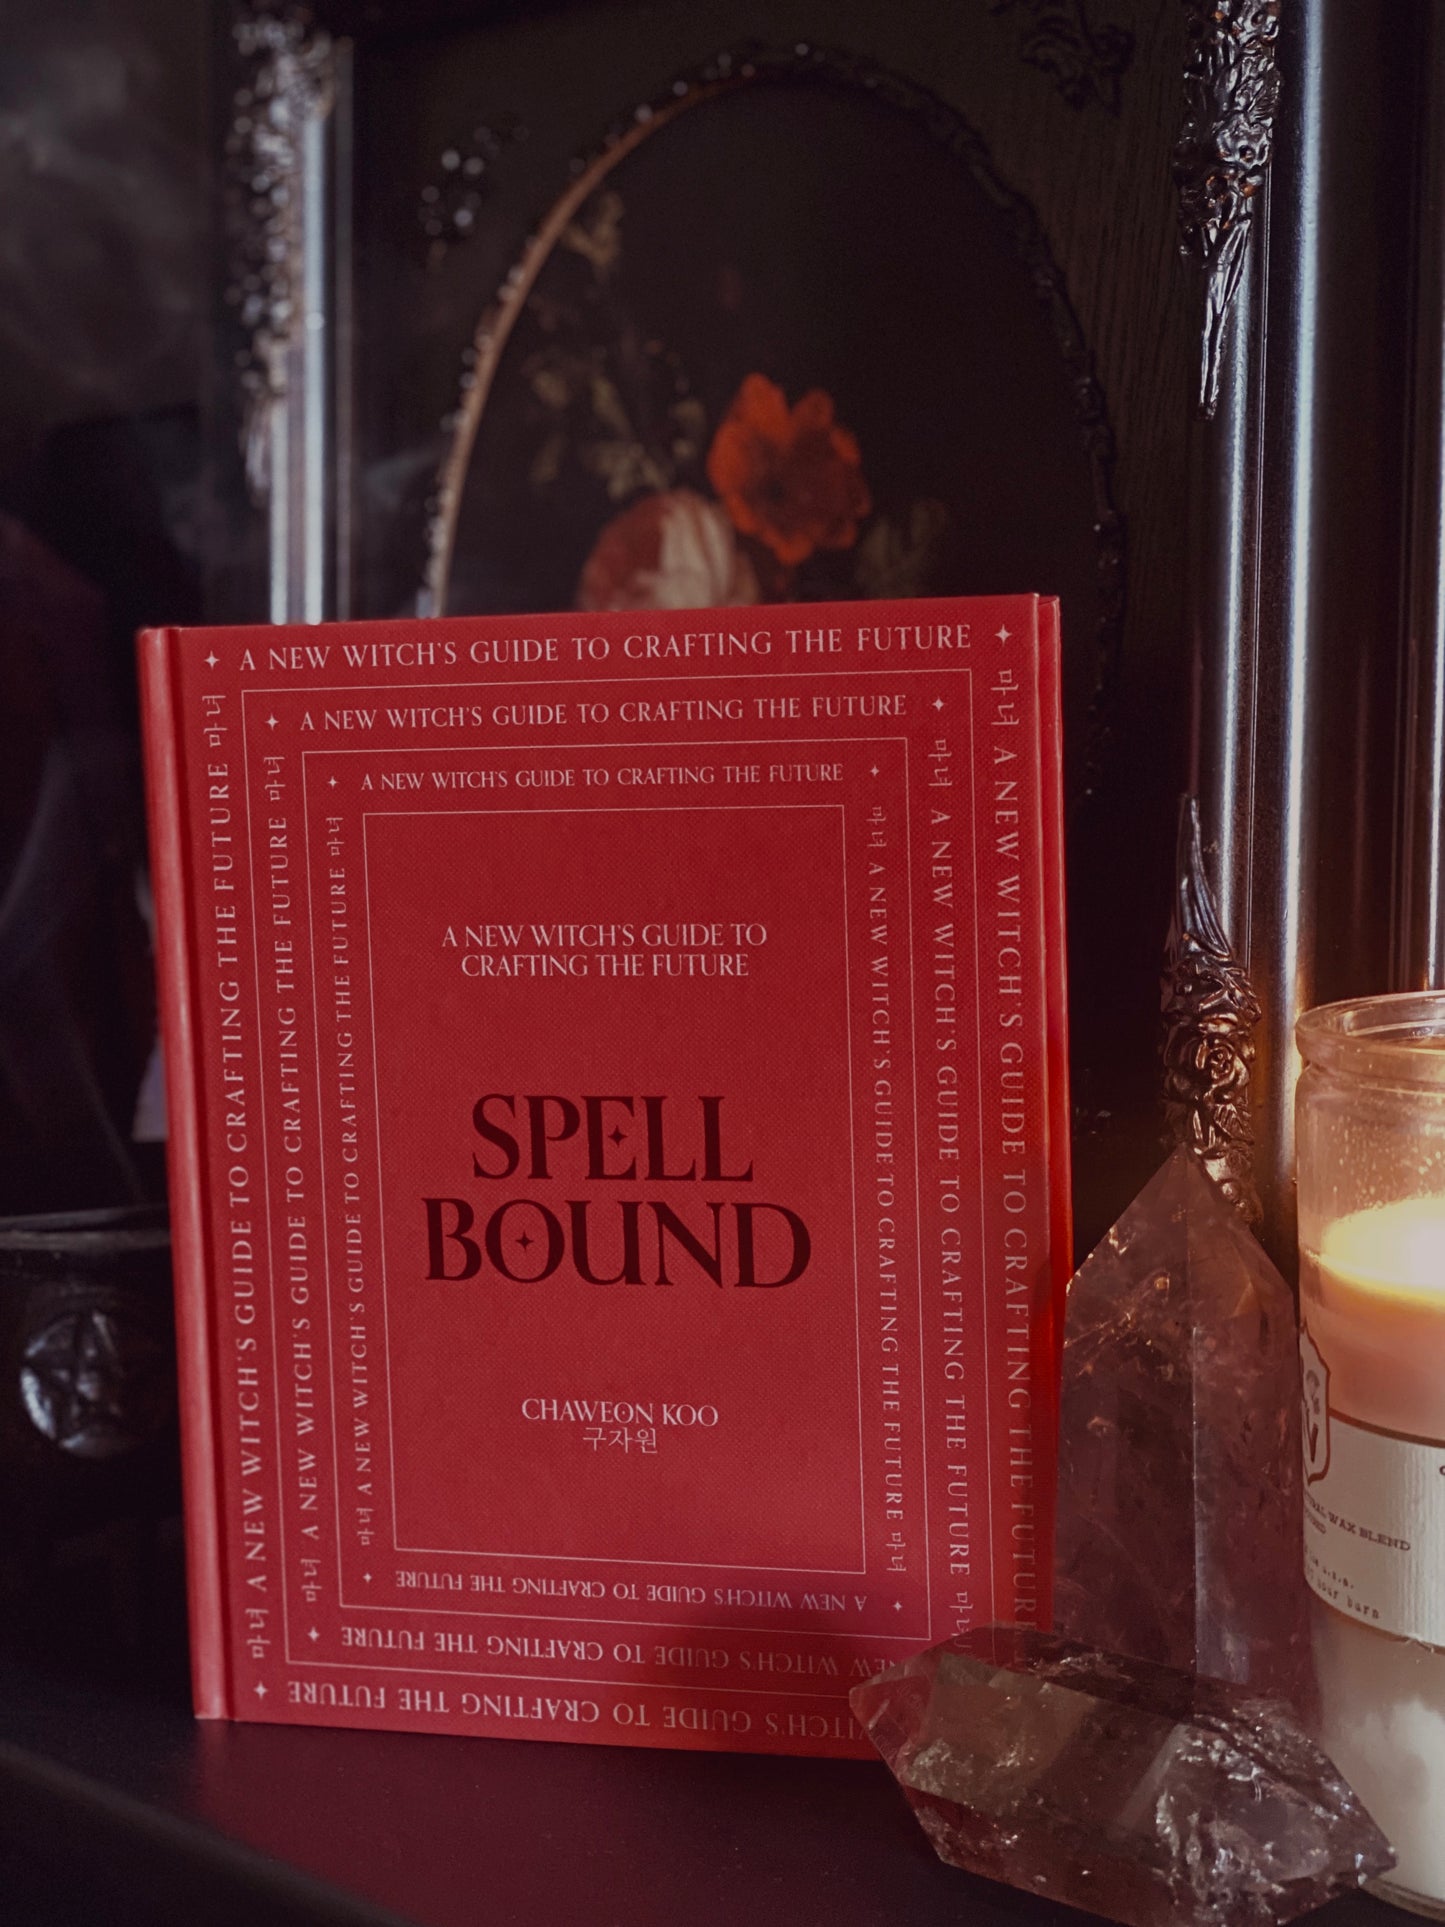 Spellbound: A new witch’s guide to crafting the future